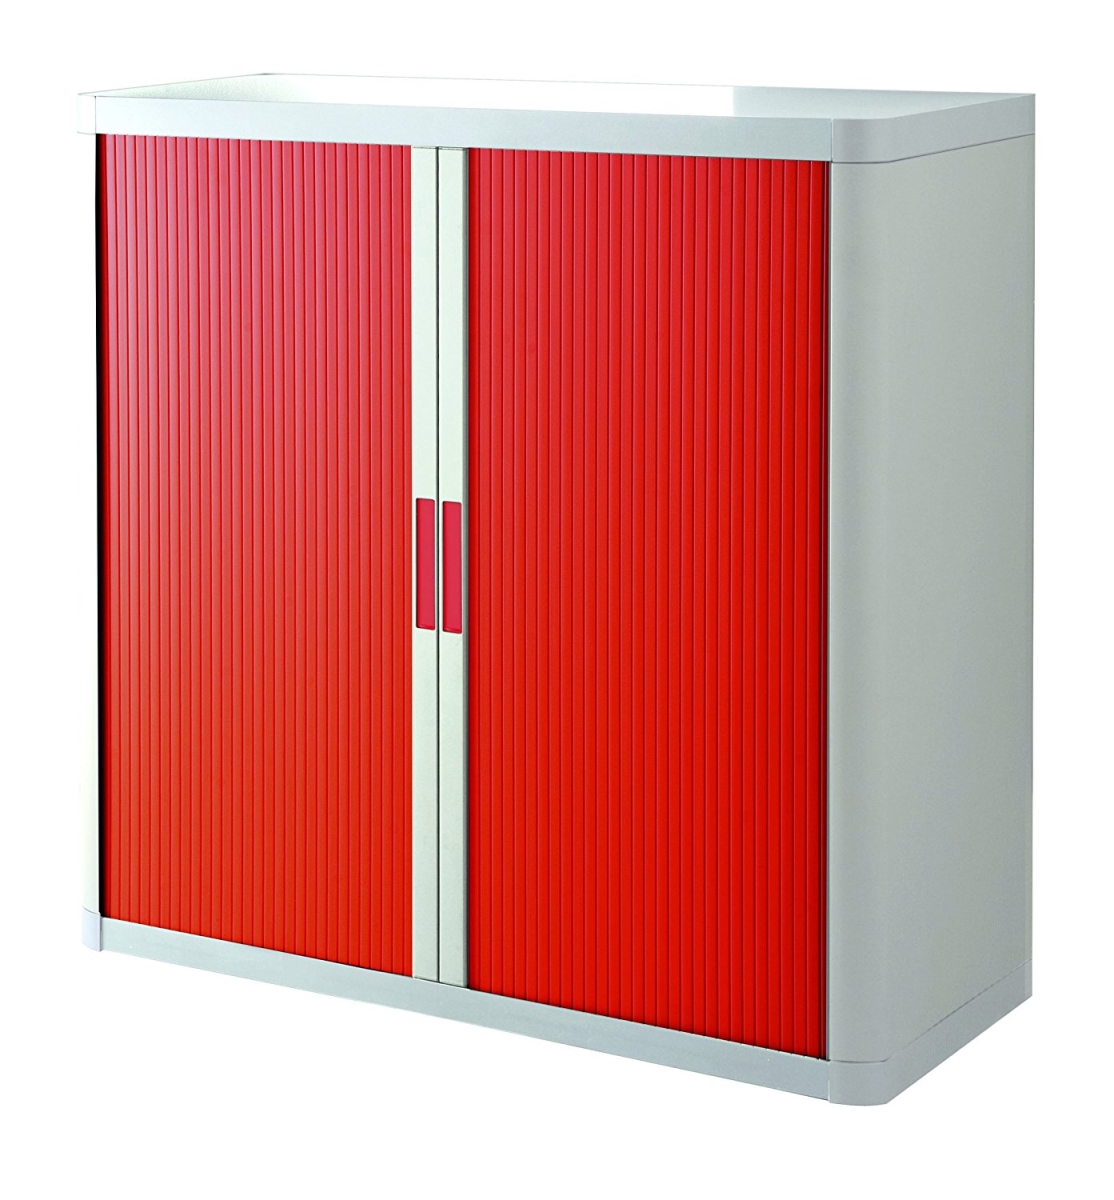 E1ct0009800042 41 In. Easyoffice Storage Cabinet, White & Red